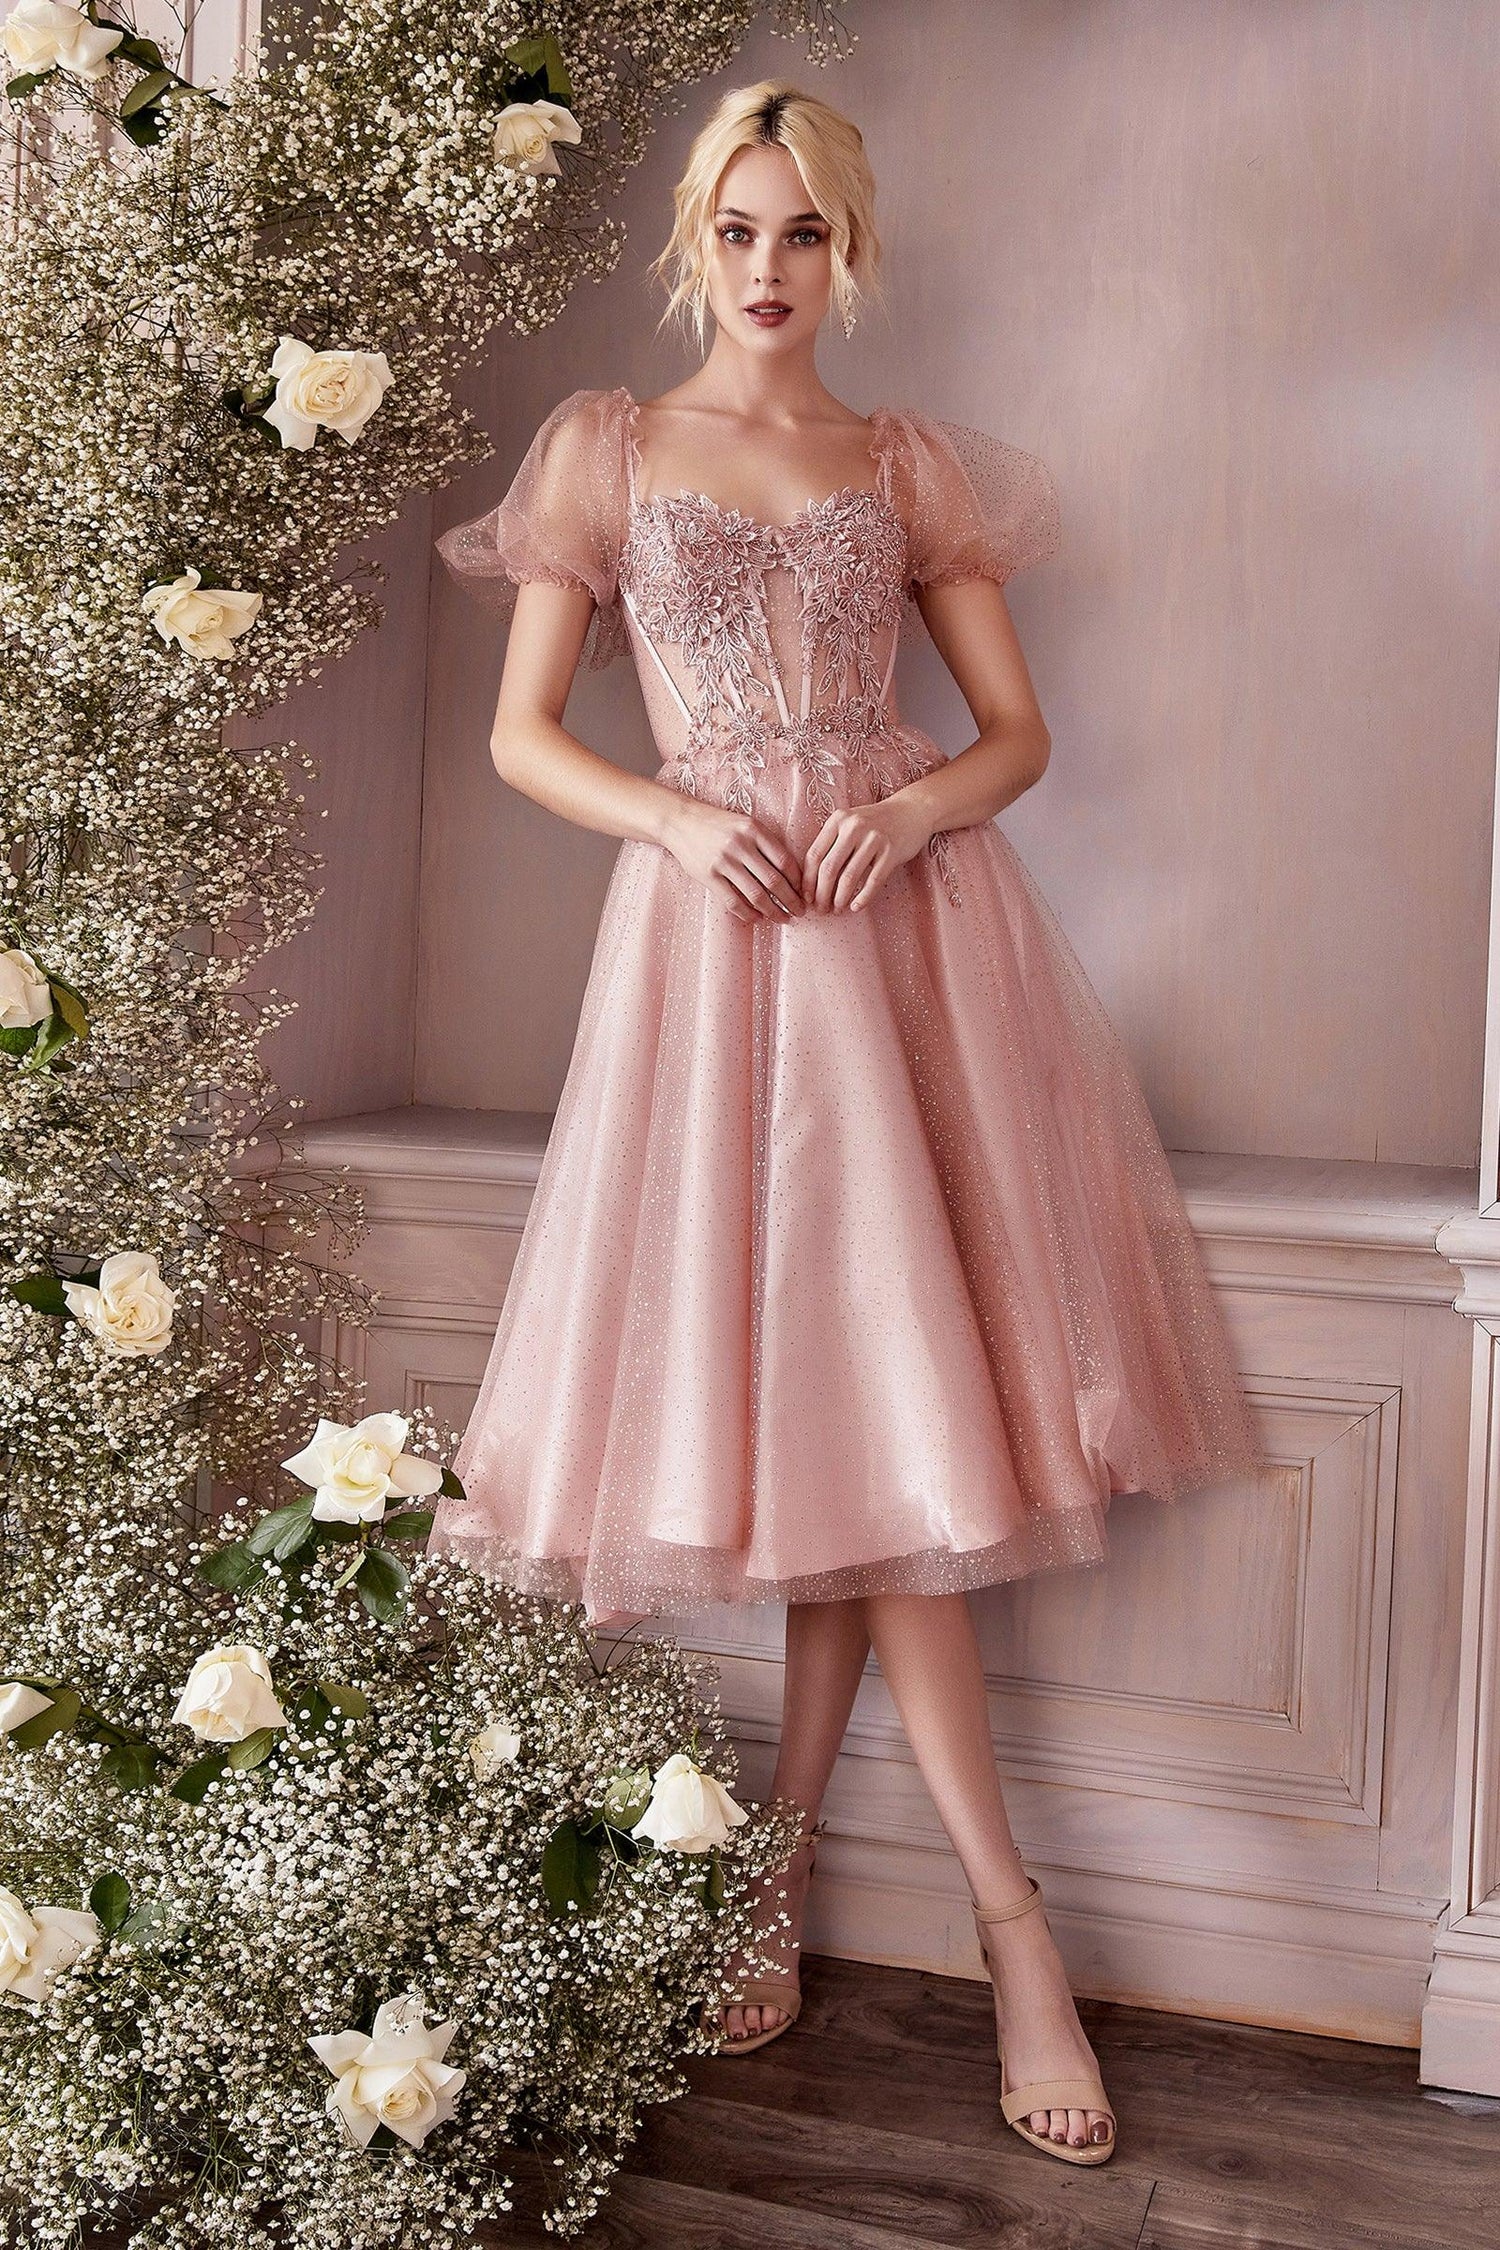 Prom Gowns Bedford & Sackville, Blush Prom